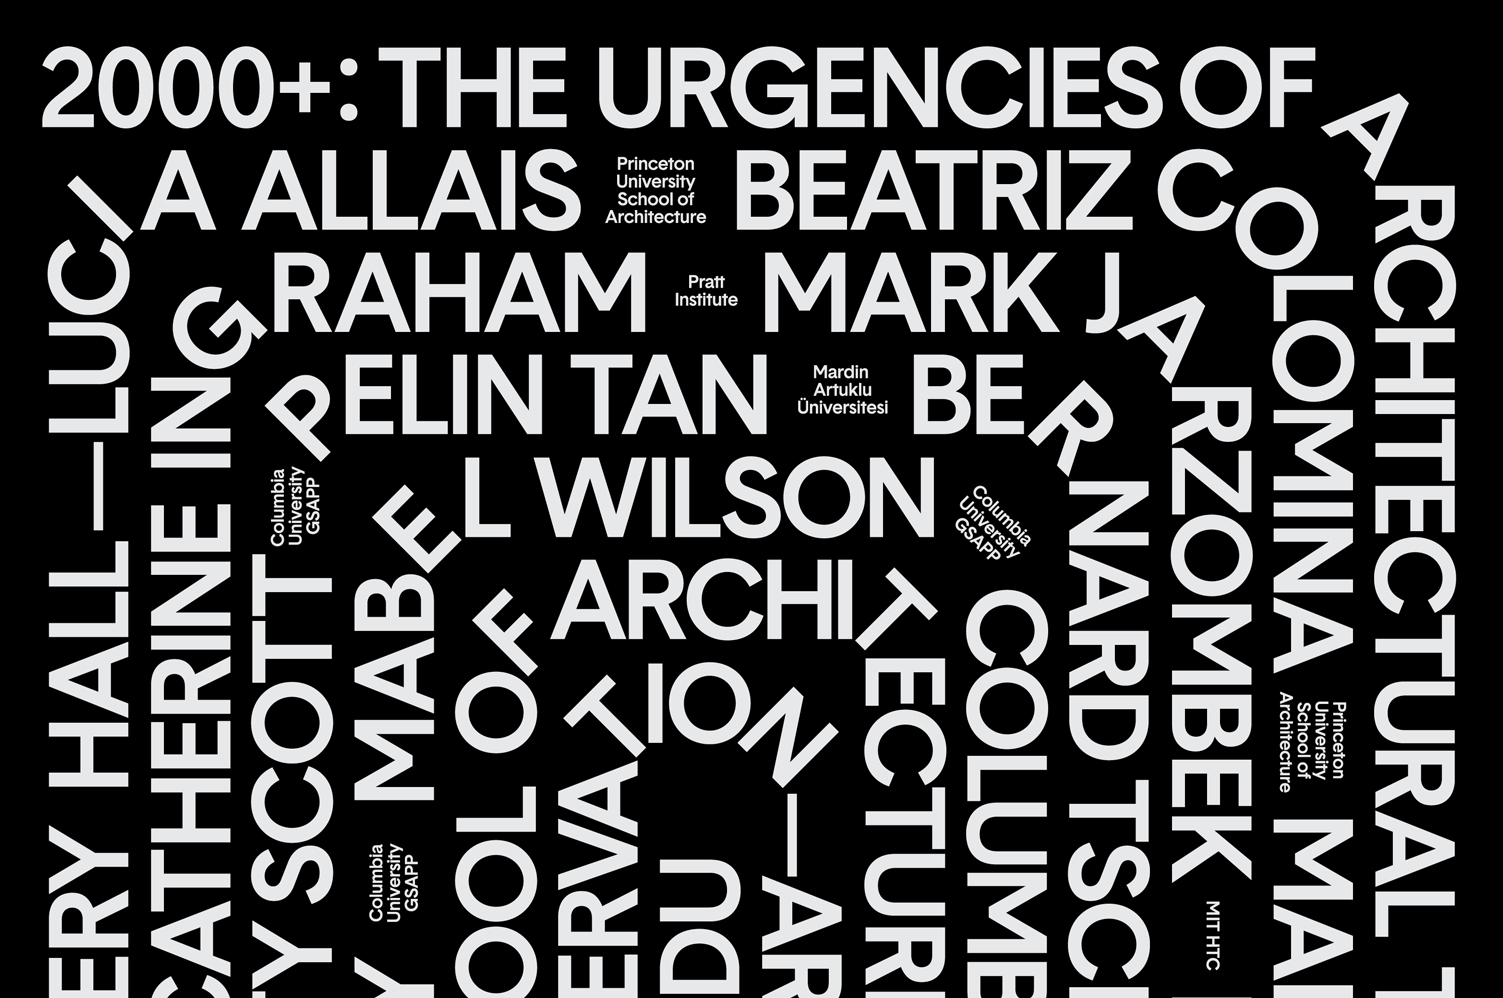 2000+: Urgencies of Architectural Theory Conference  - MTWTF